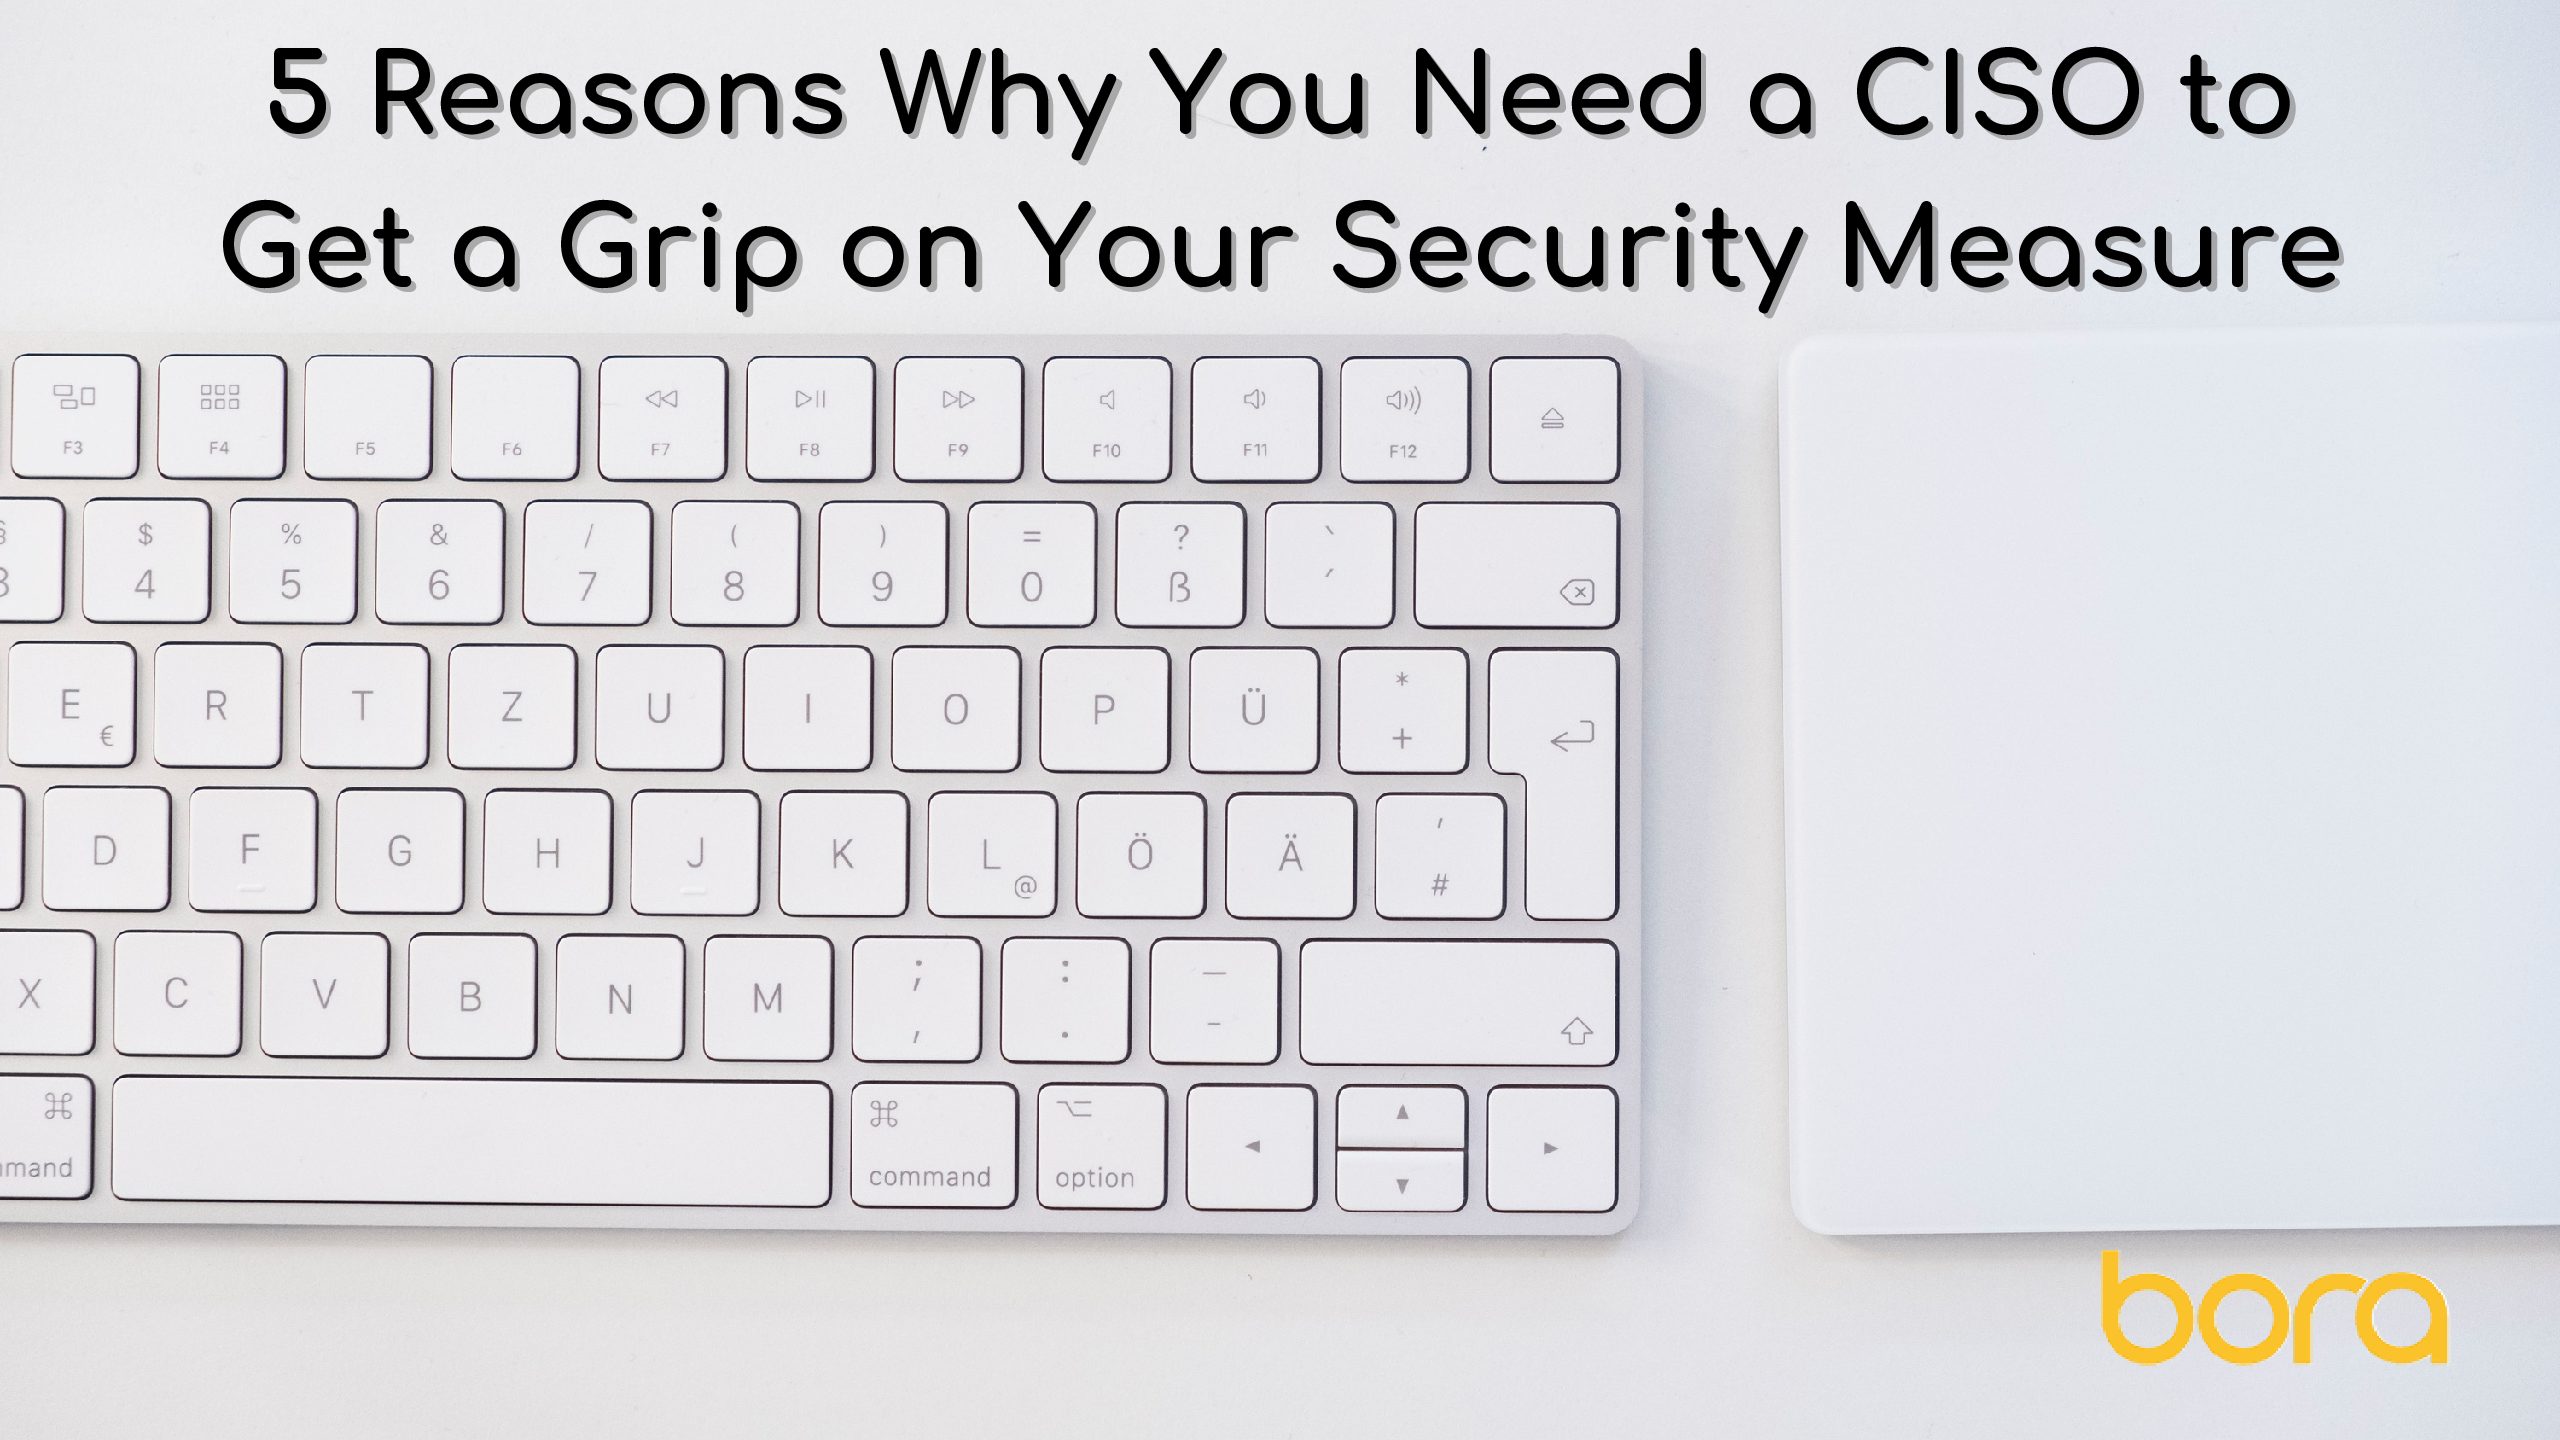 5 Reasons Why You Need a CISO to Get a Grip on Your Security Measure